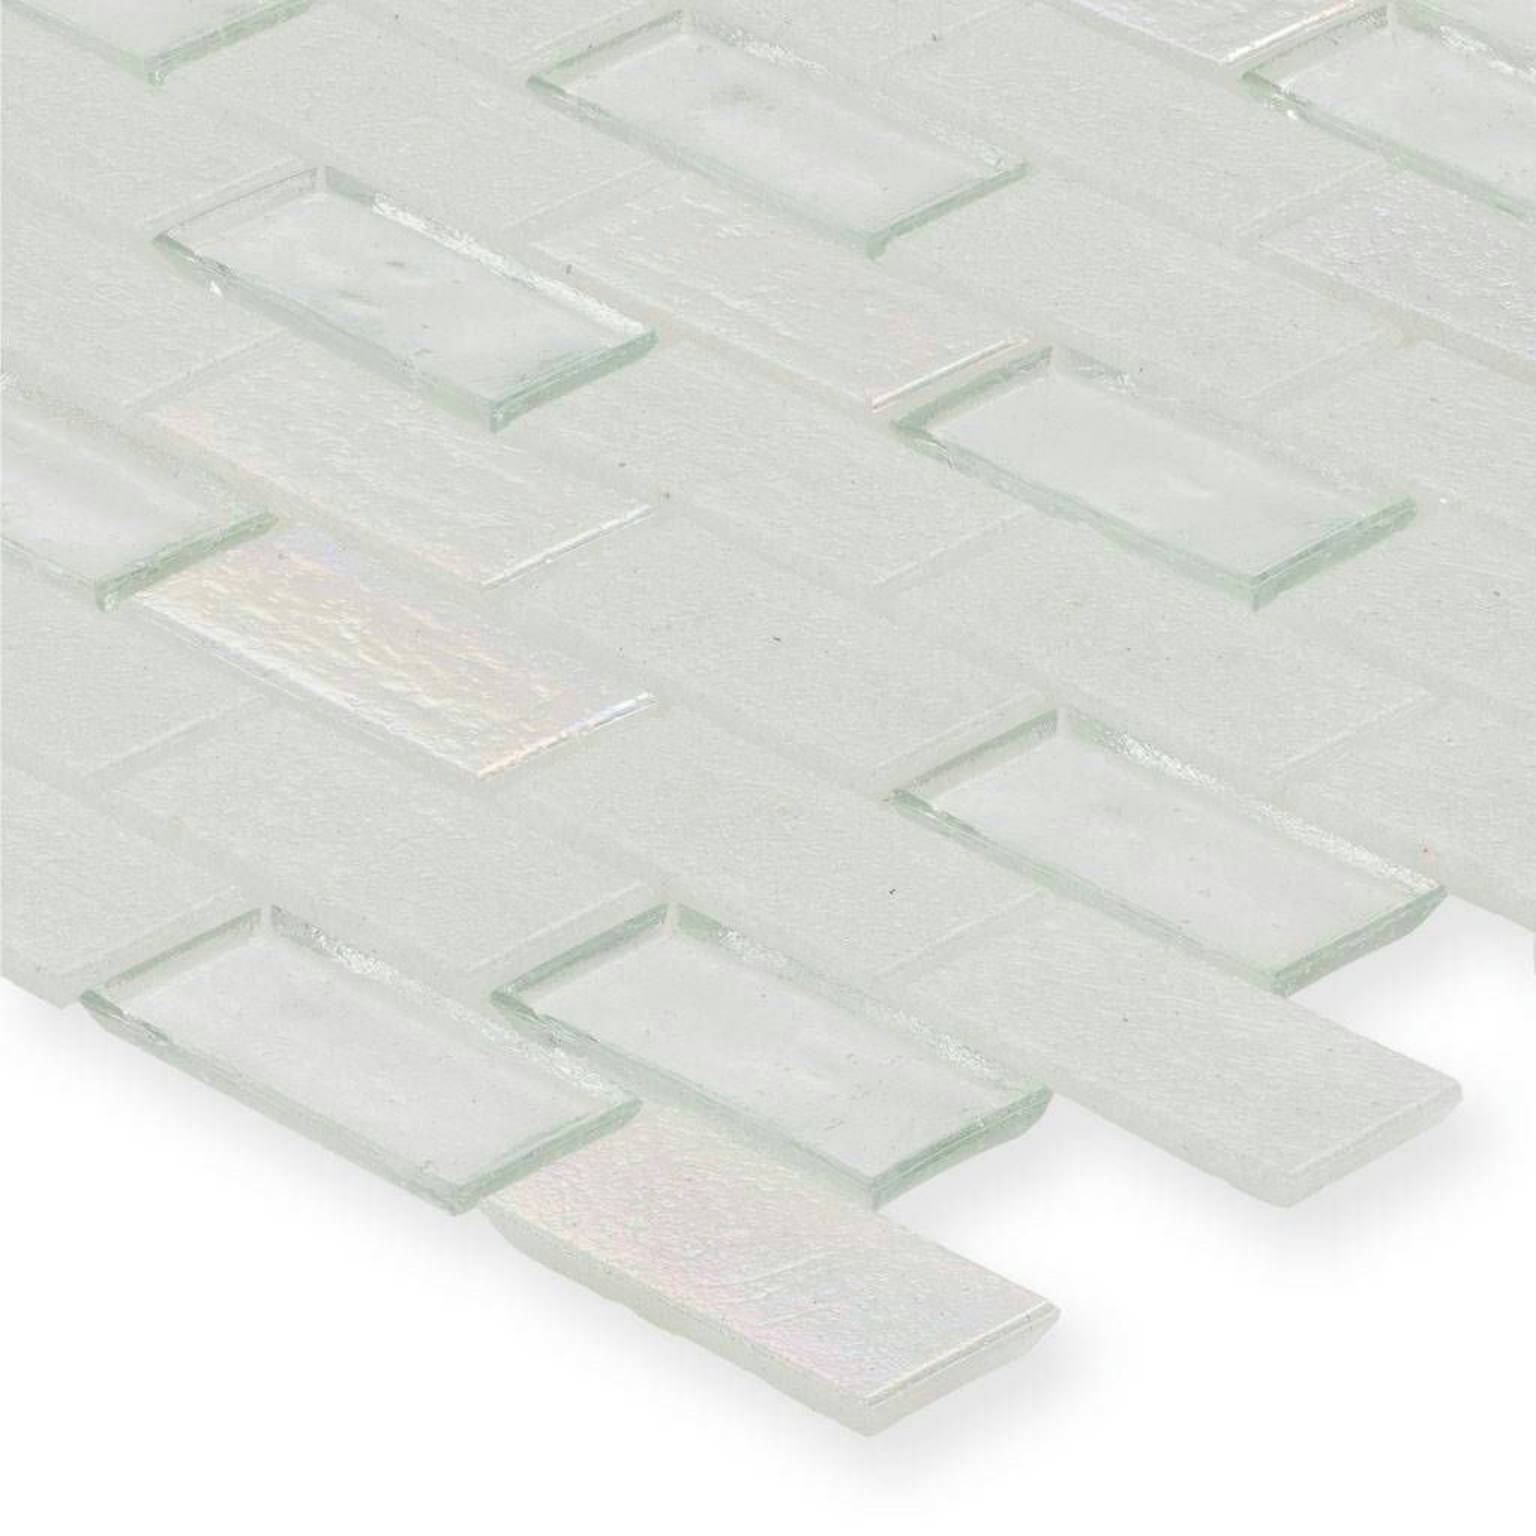 Iceberg Brick | Stones And More | Finest selection of Mosaics, Glass, Tile and Stone